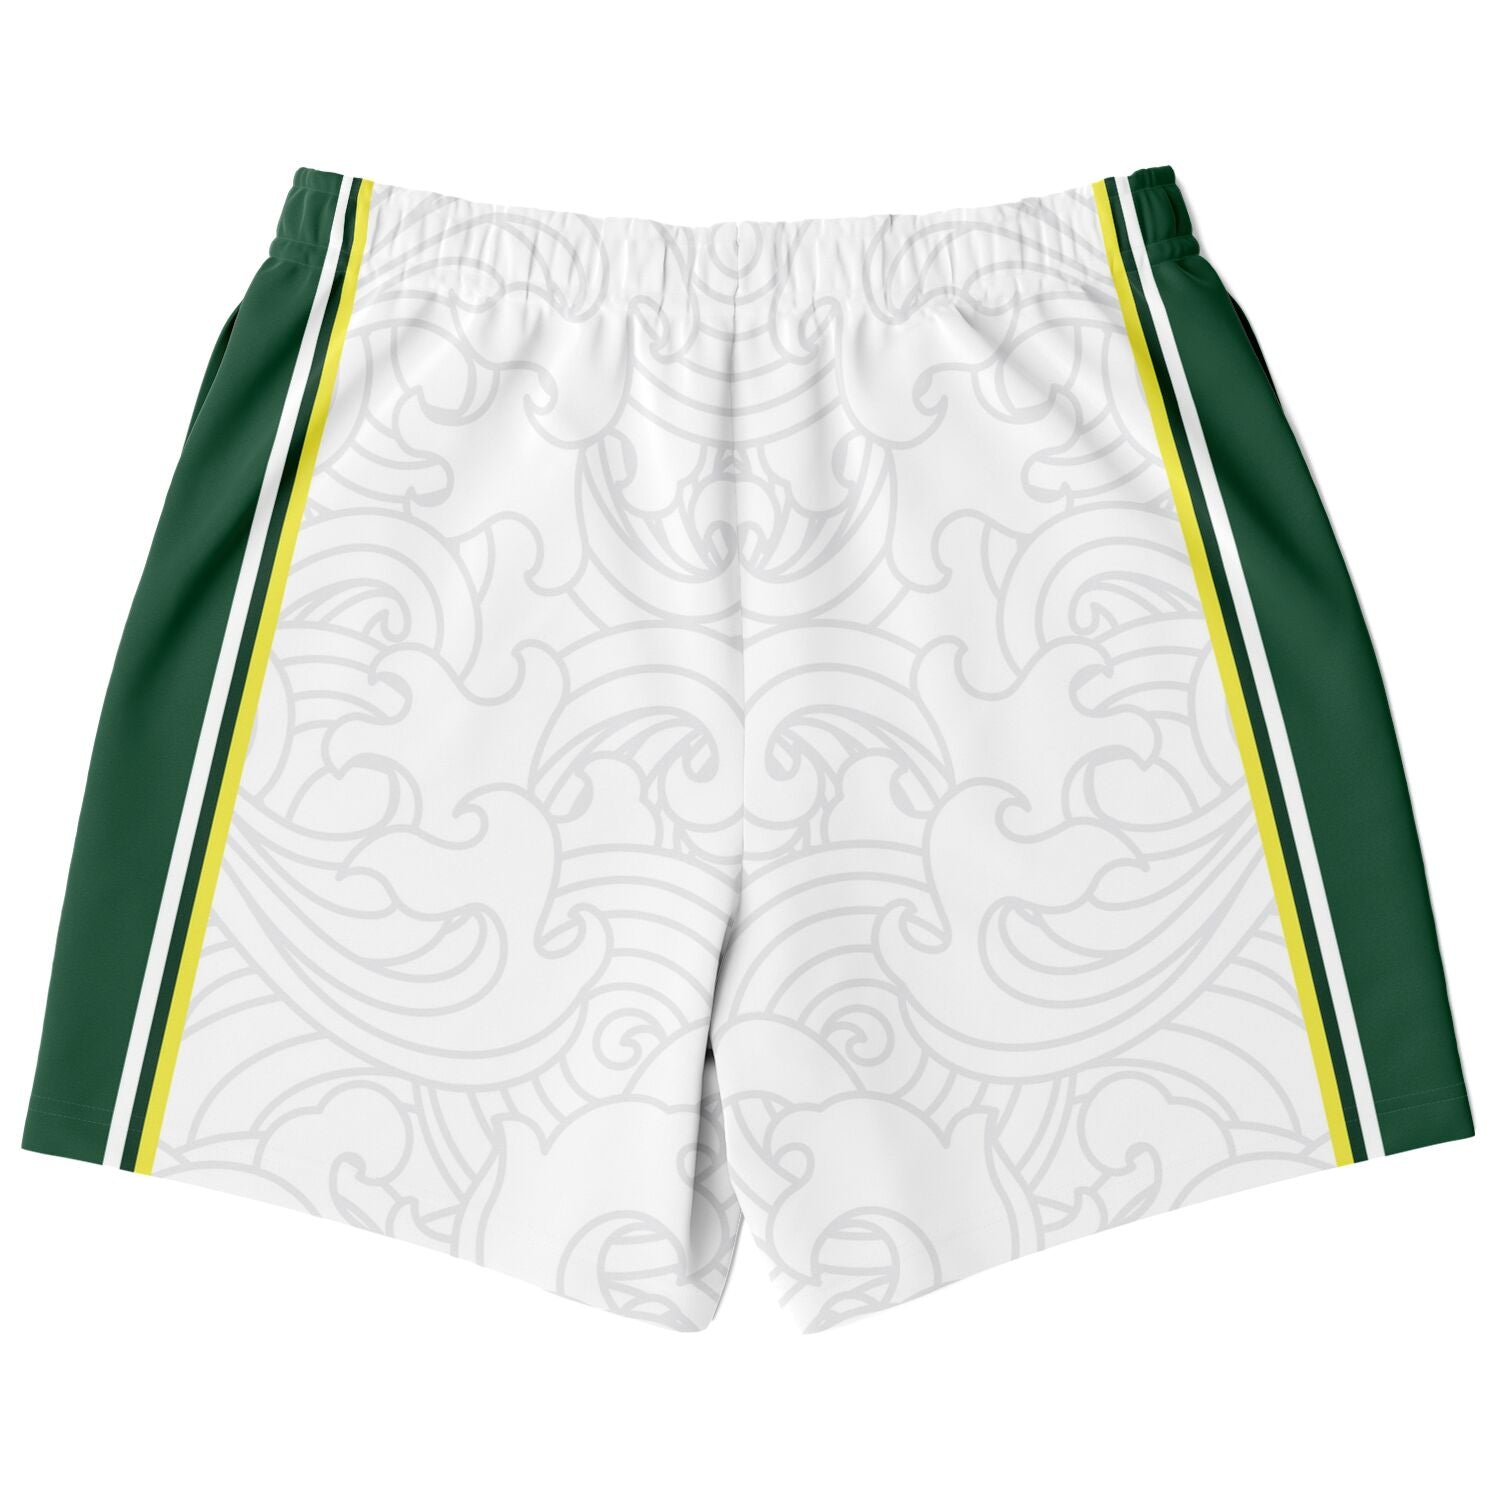 DearBBall Fashion Shorts - Spooky Seattle Tattoos White Edition